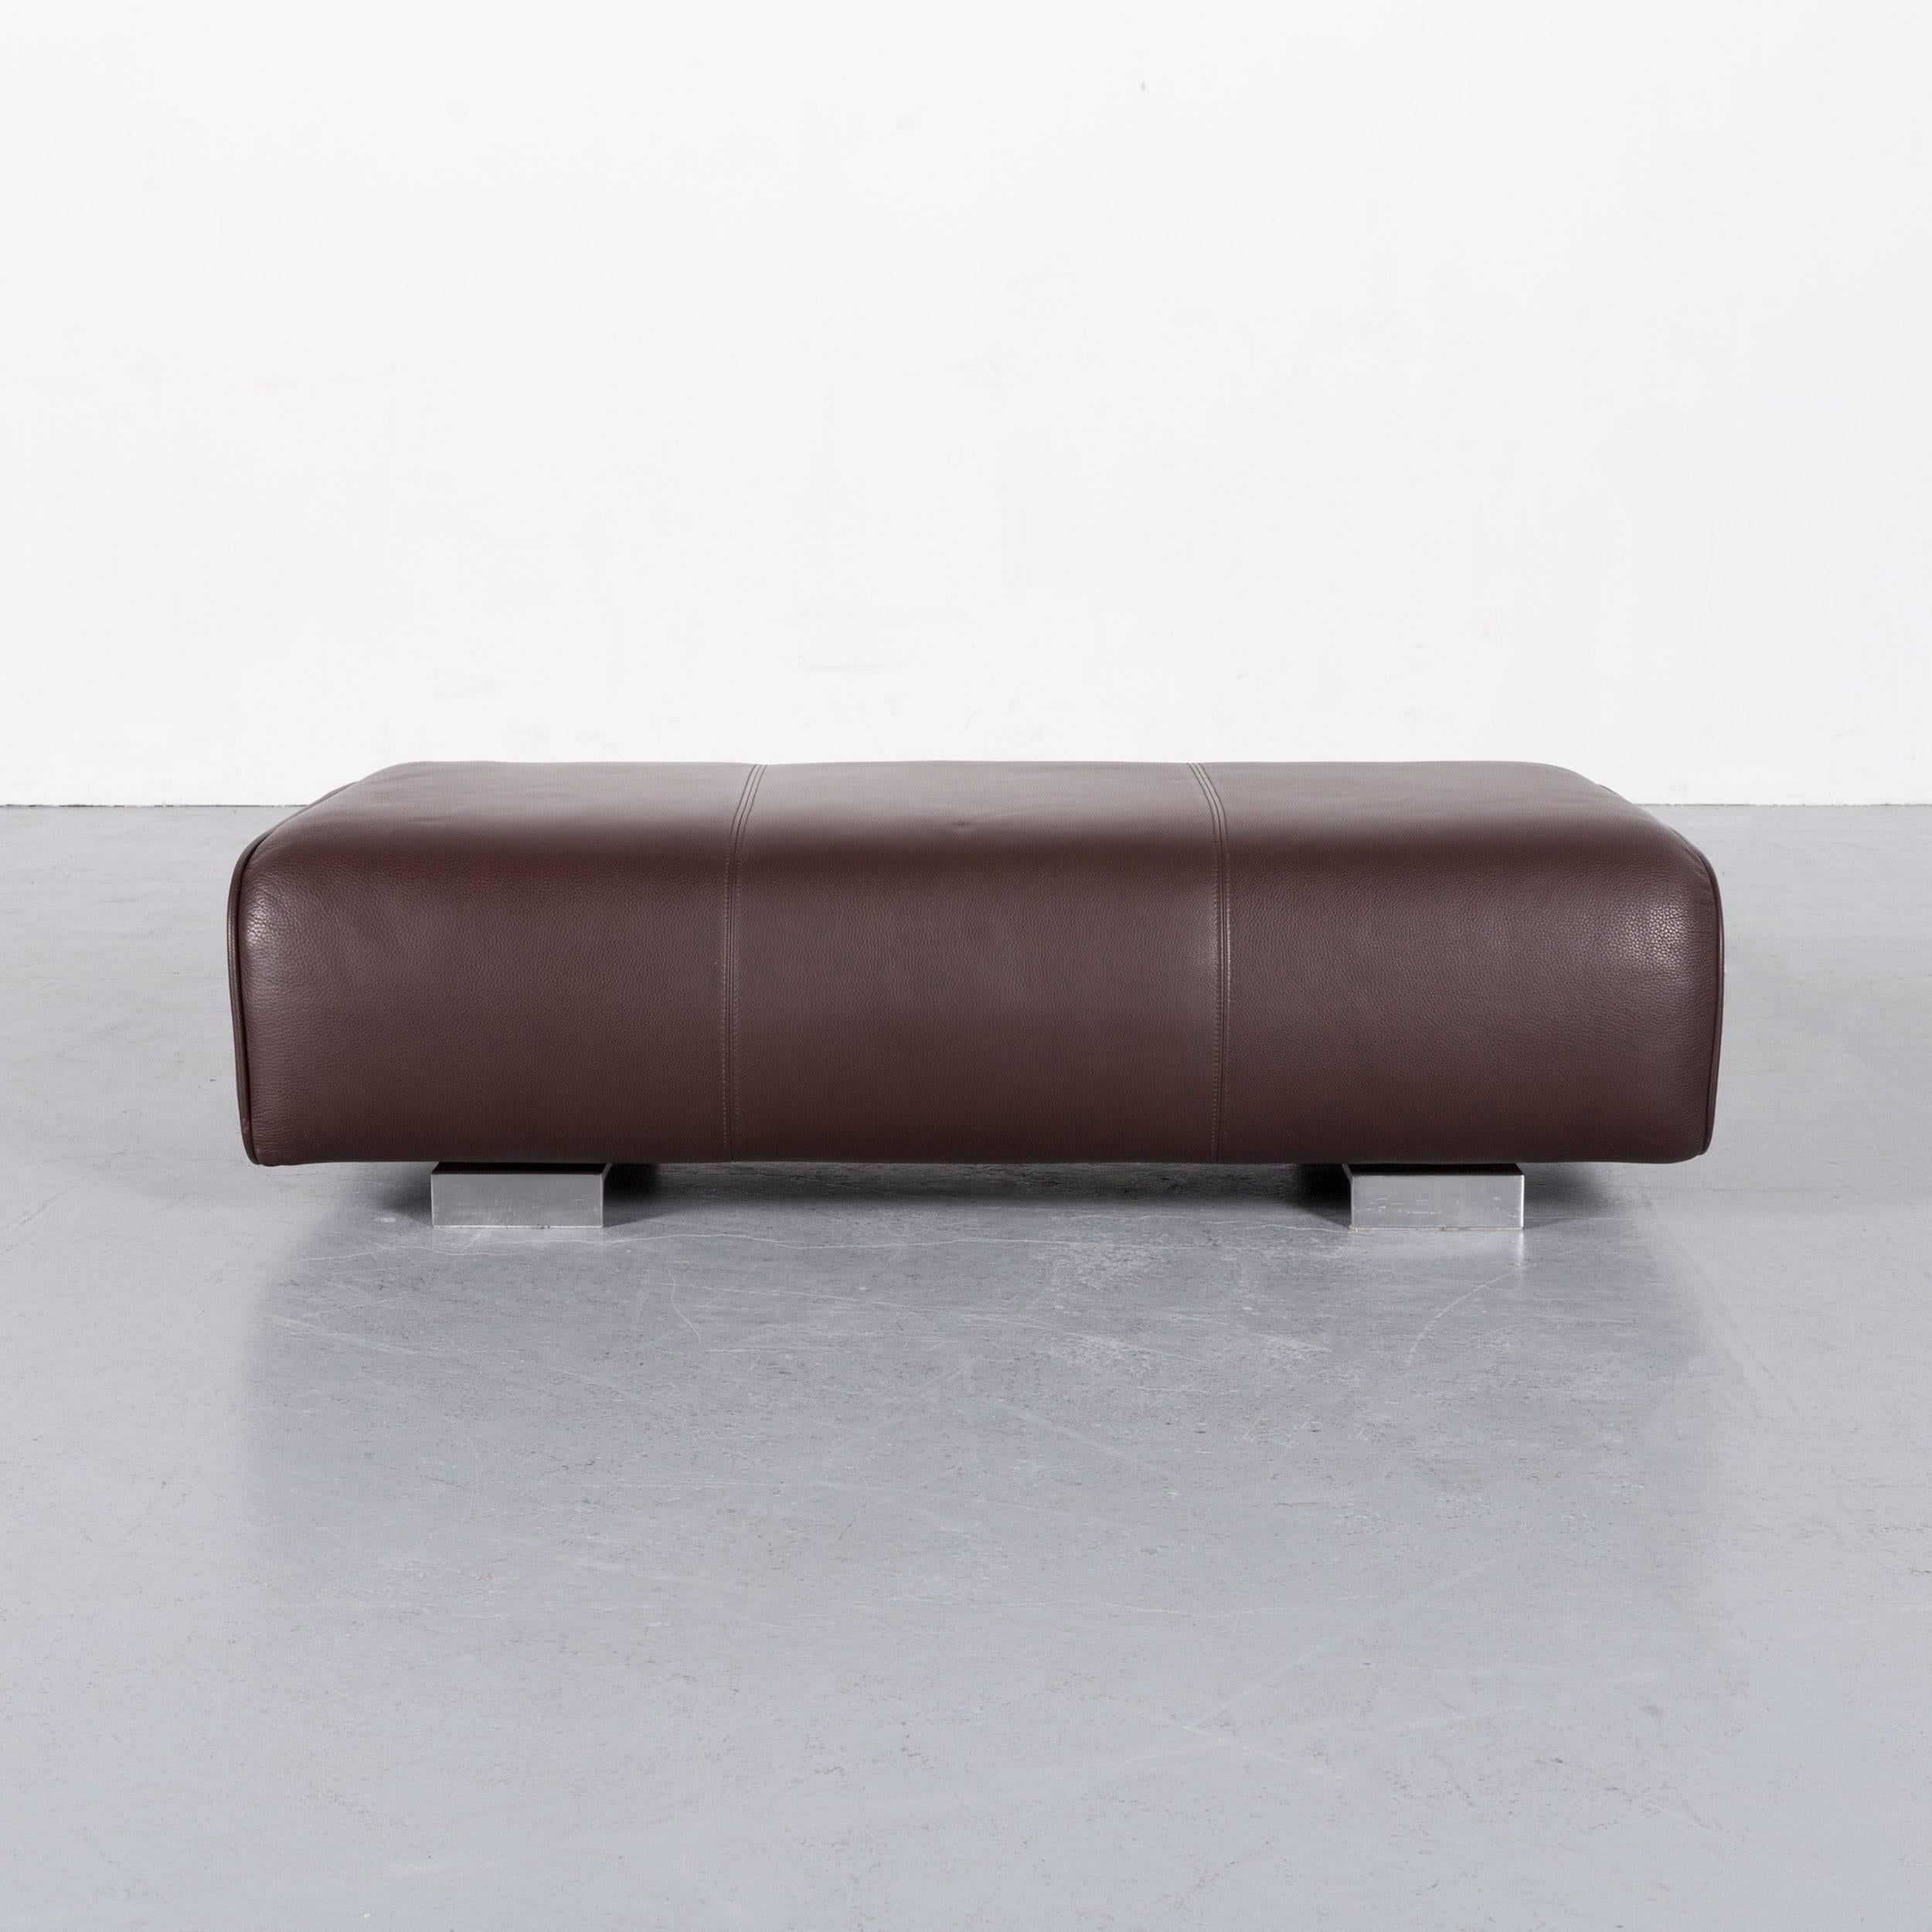 German Rolf Benz 6300 Leather Foot-Stool Brown Bench